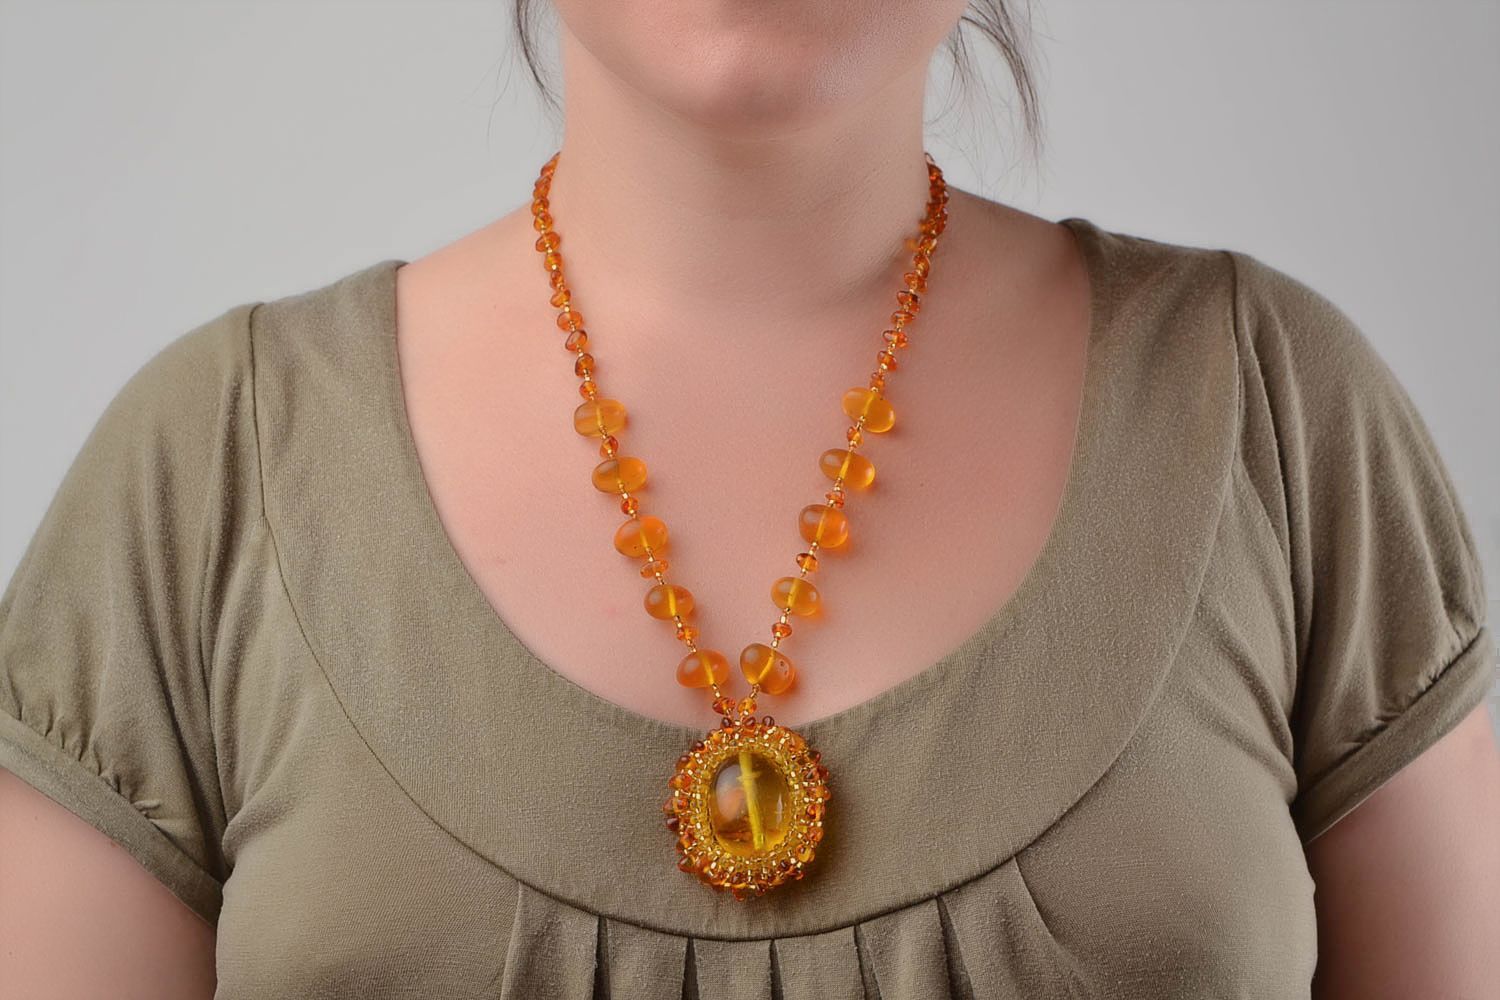 Handmade cute long pendant made of beads and natural stones of amber color photo 1